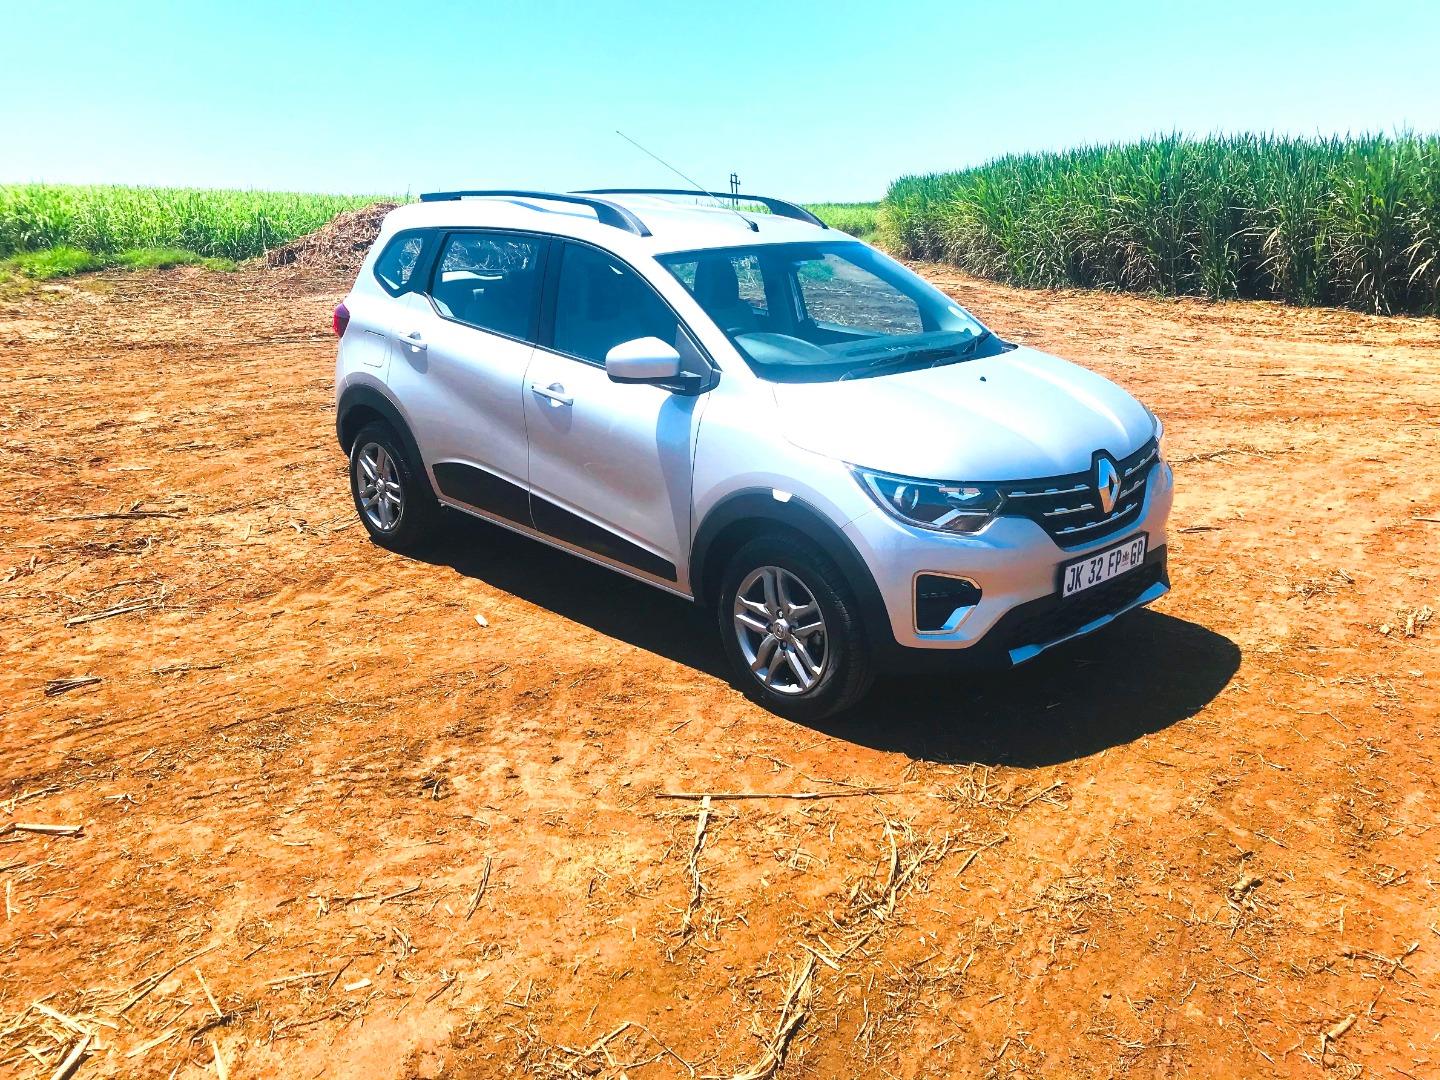 Renault launches 'Made in India' Triber in South Africa